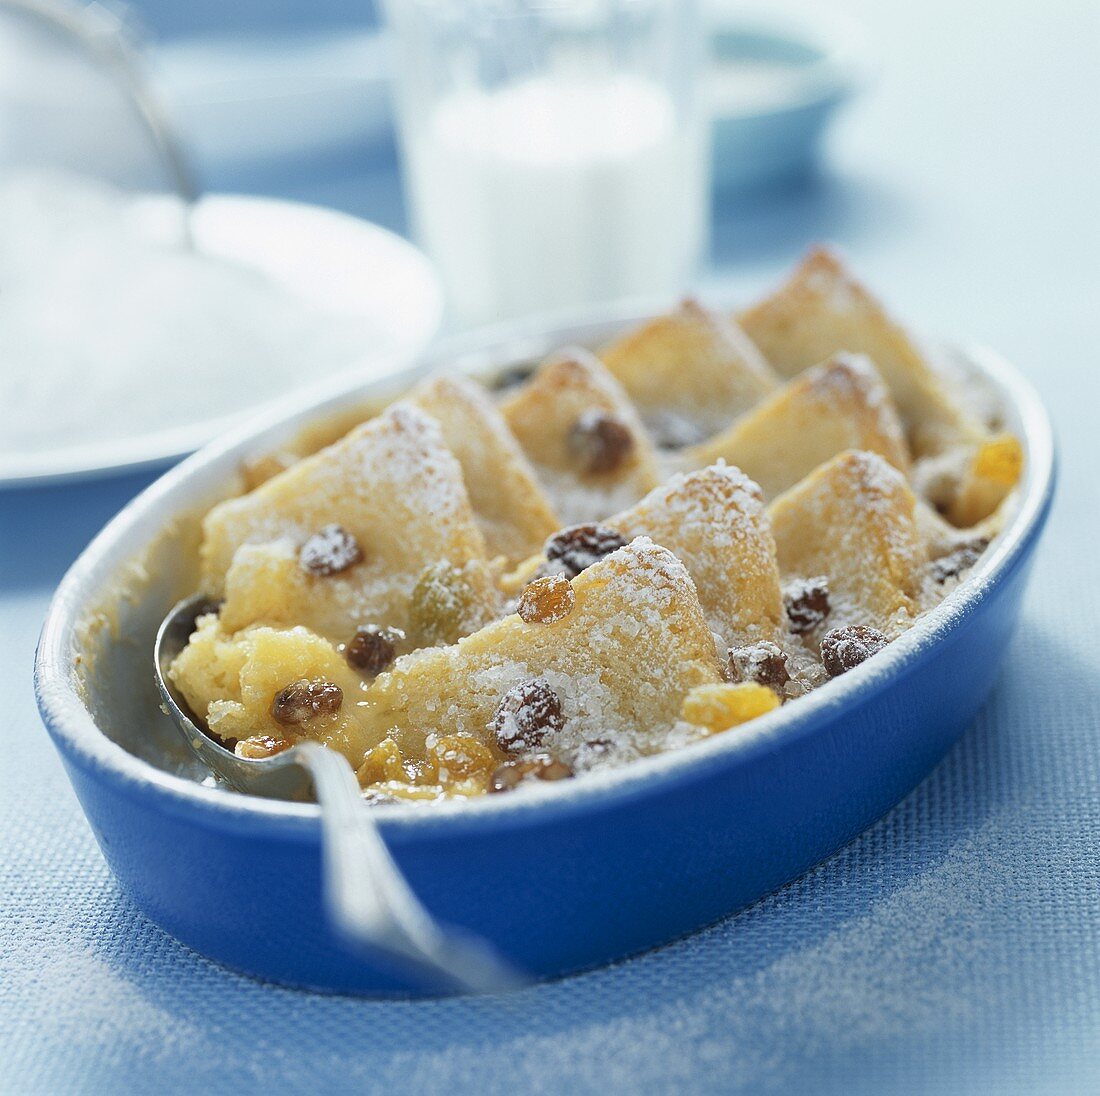 Bread and butter pudding with raisins for breakfast